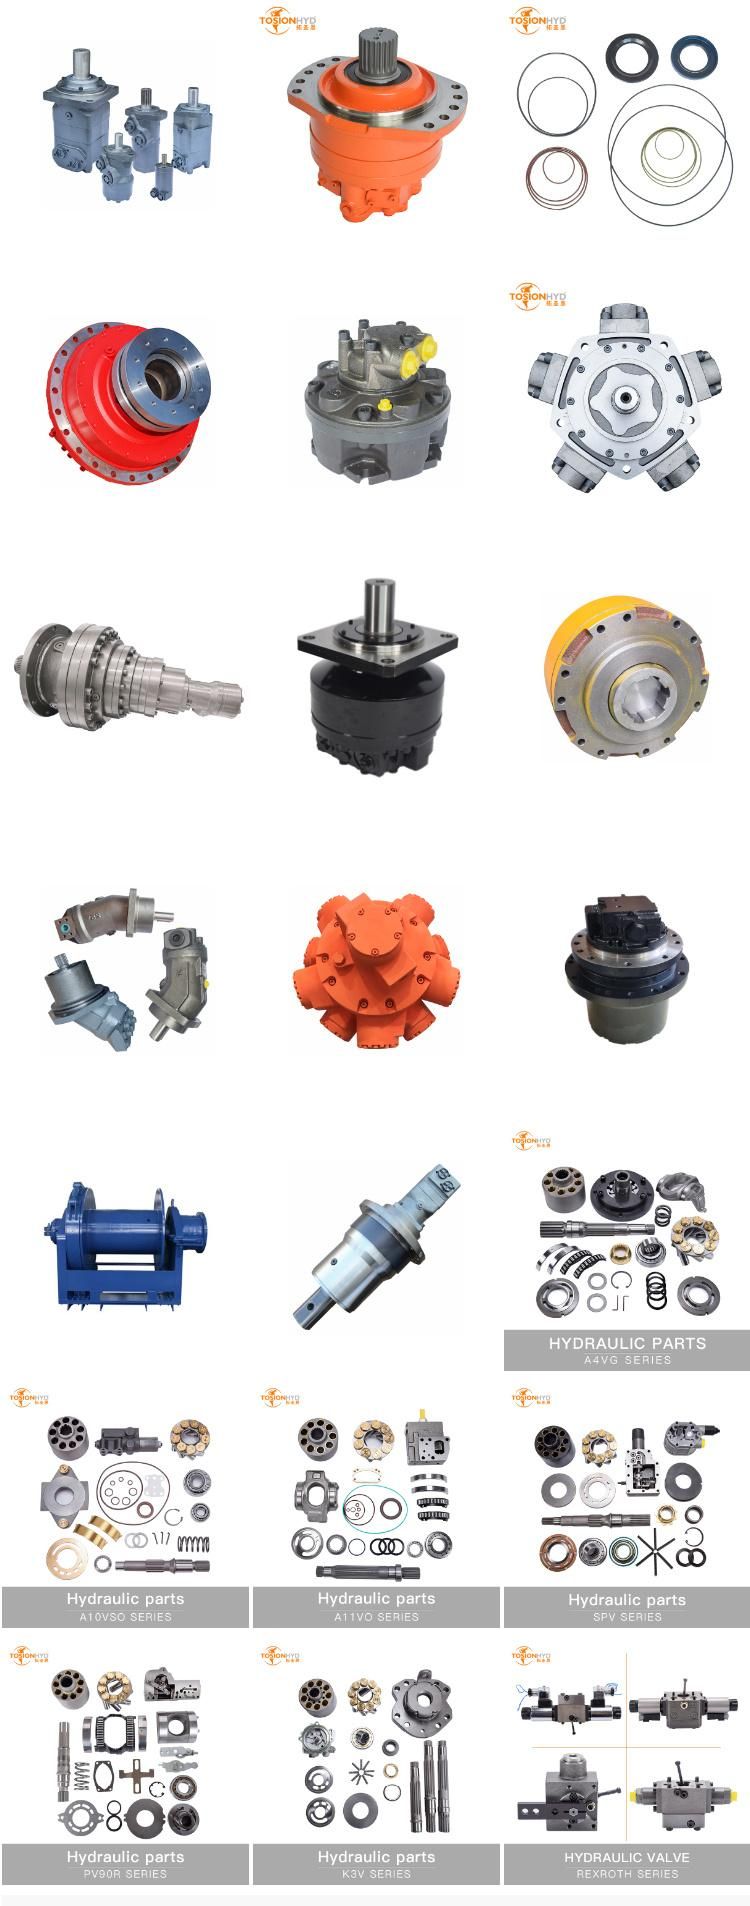 A2FM 45 Hydraulic Motor Parts with Rexroth Spare Repair Kits